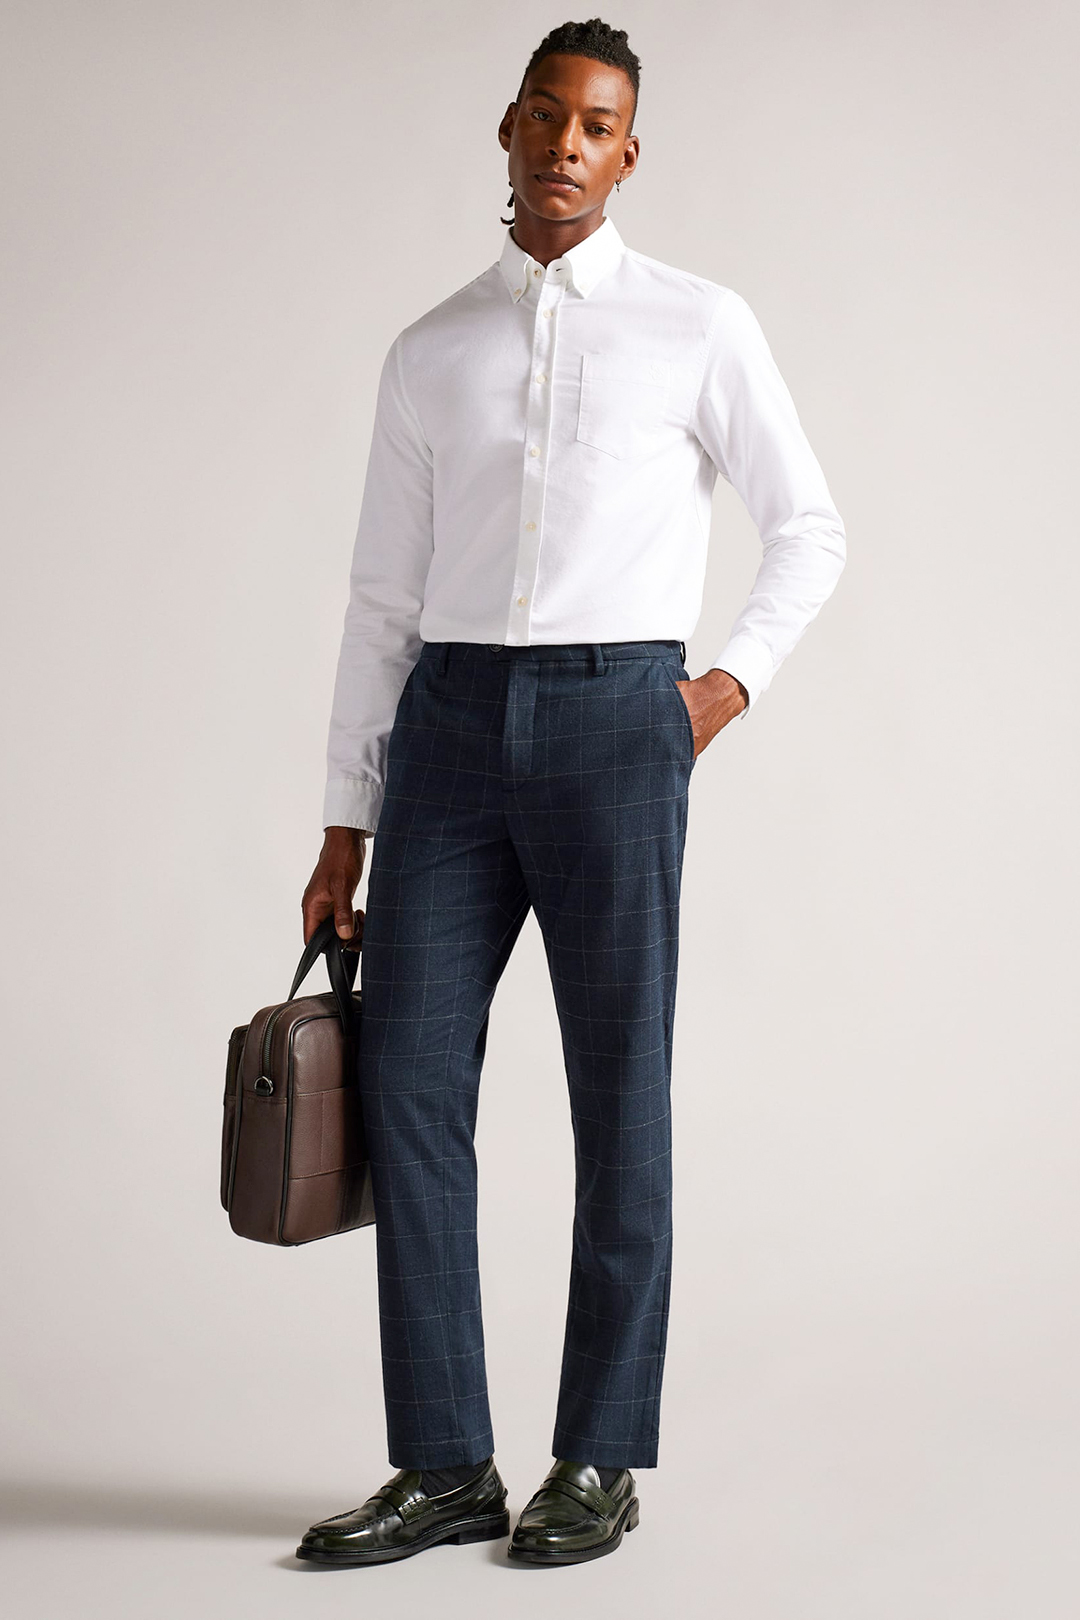 White button-down shirt, navy check dress pants, and black penny loafers outfit